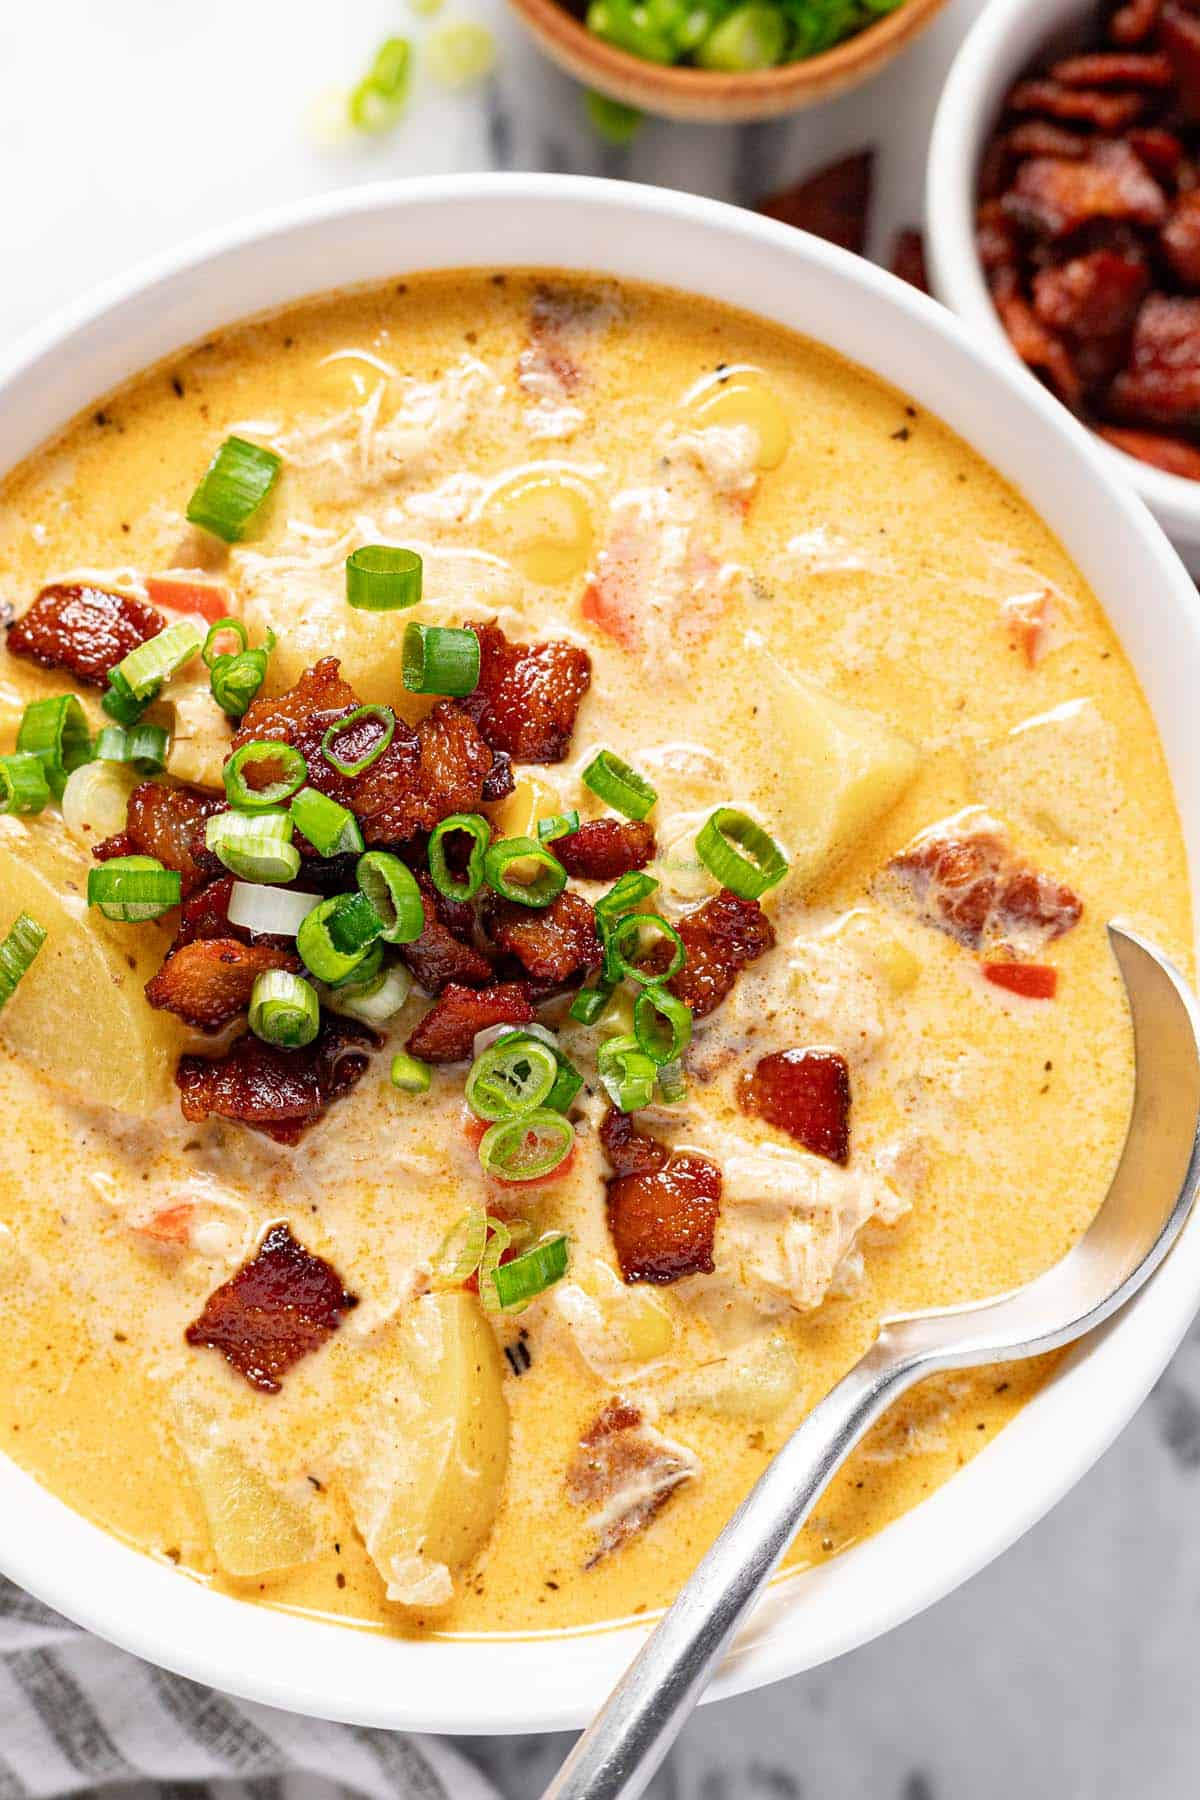 Bowl of chicken corn chowder garnished with bacon and green onion.